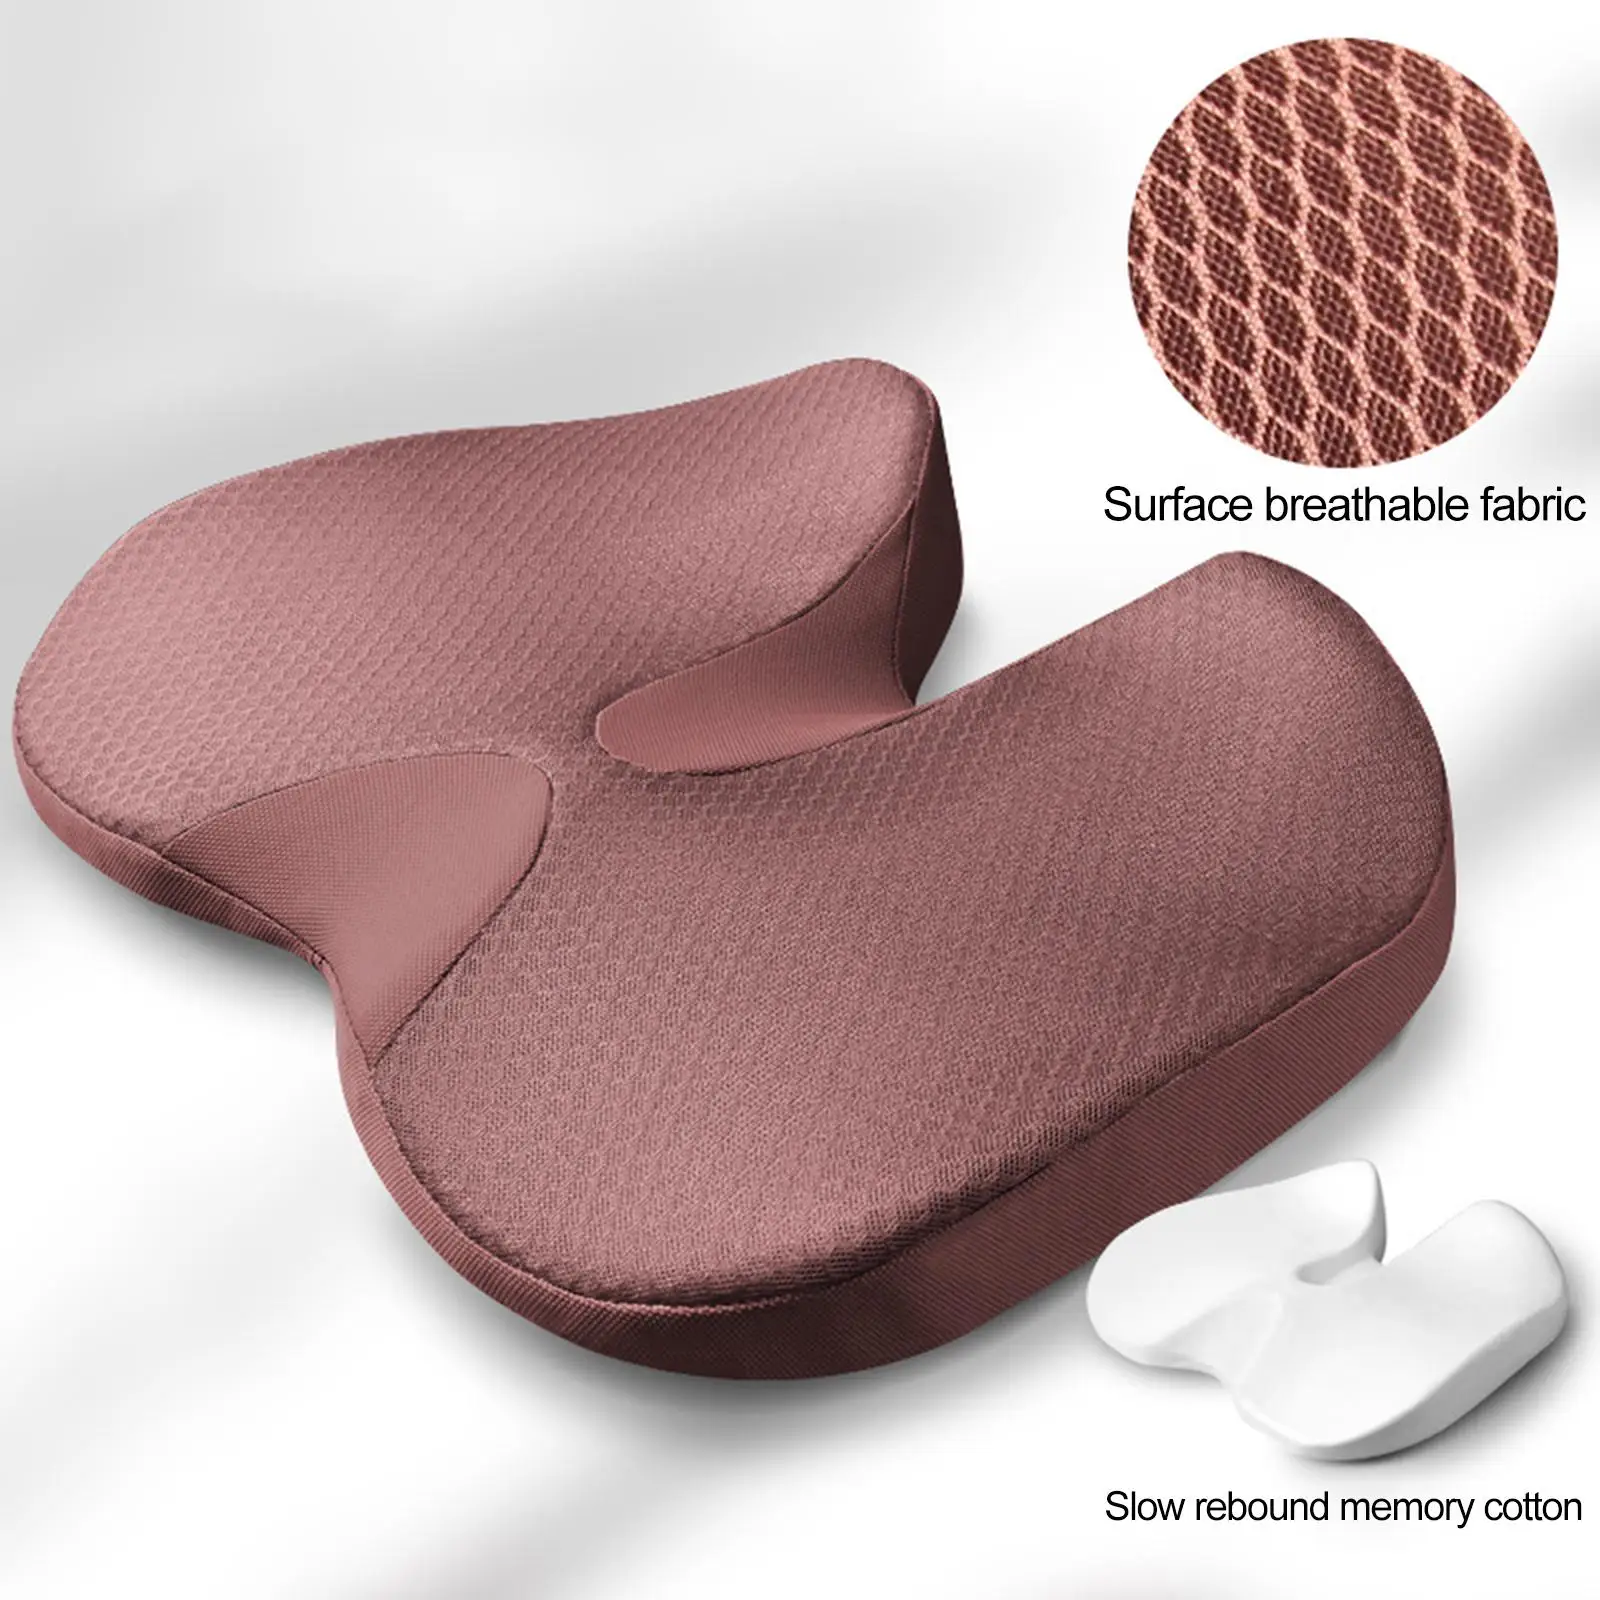 Breathable Chair Seat Cushion Non Slip Orthopedic Cusion Seat Pad Removeable Cover Car Seat Cushion Comfort for Travel Driving